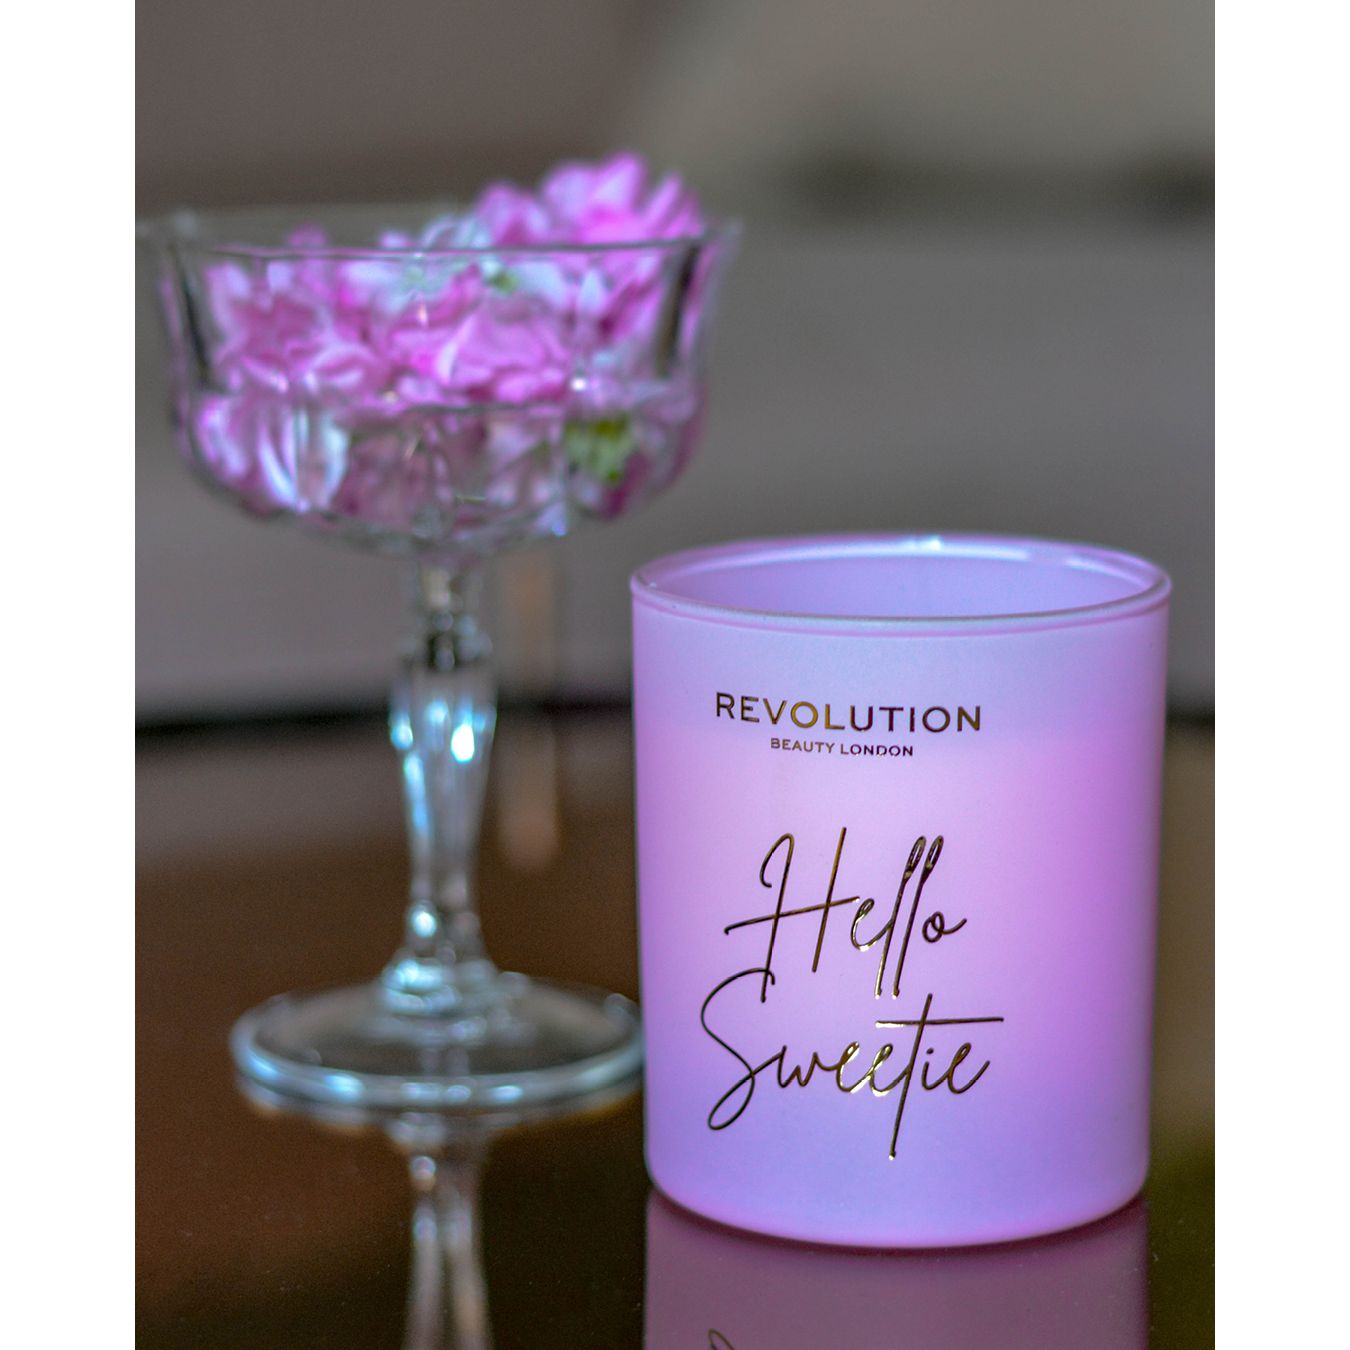 Bougie Parfumée - Scented Candle - Hello Sweetie 